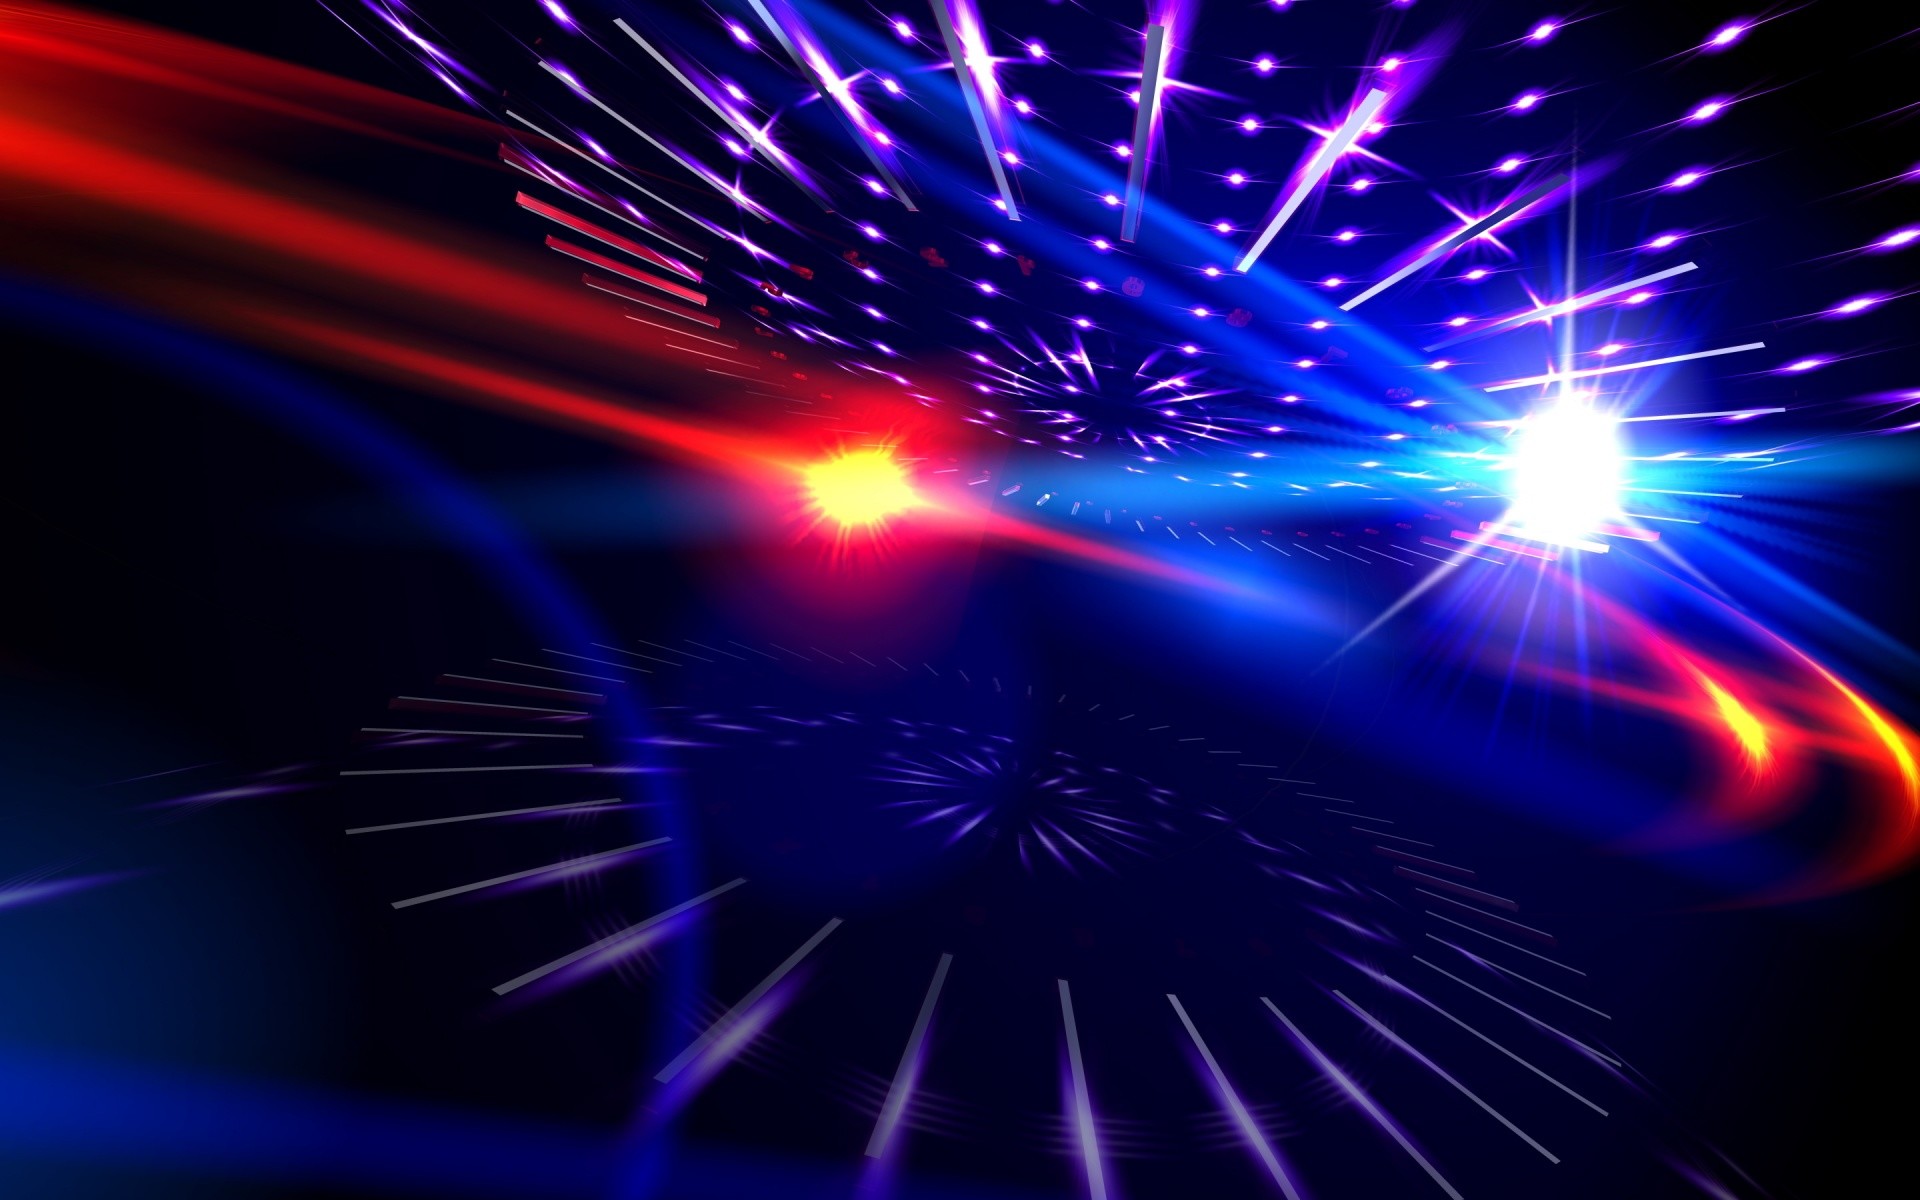 Explore Disco Lights, Red Lights, and more